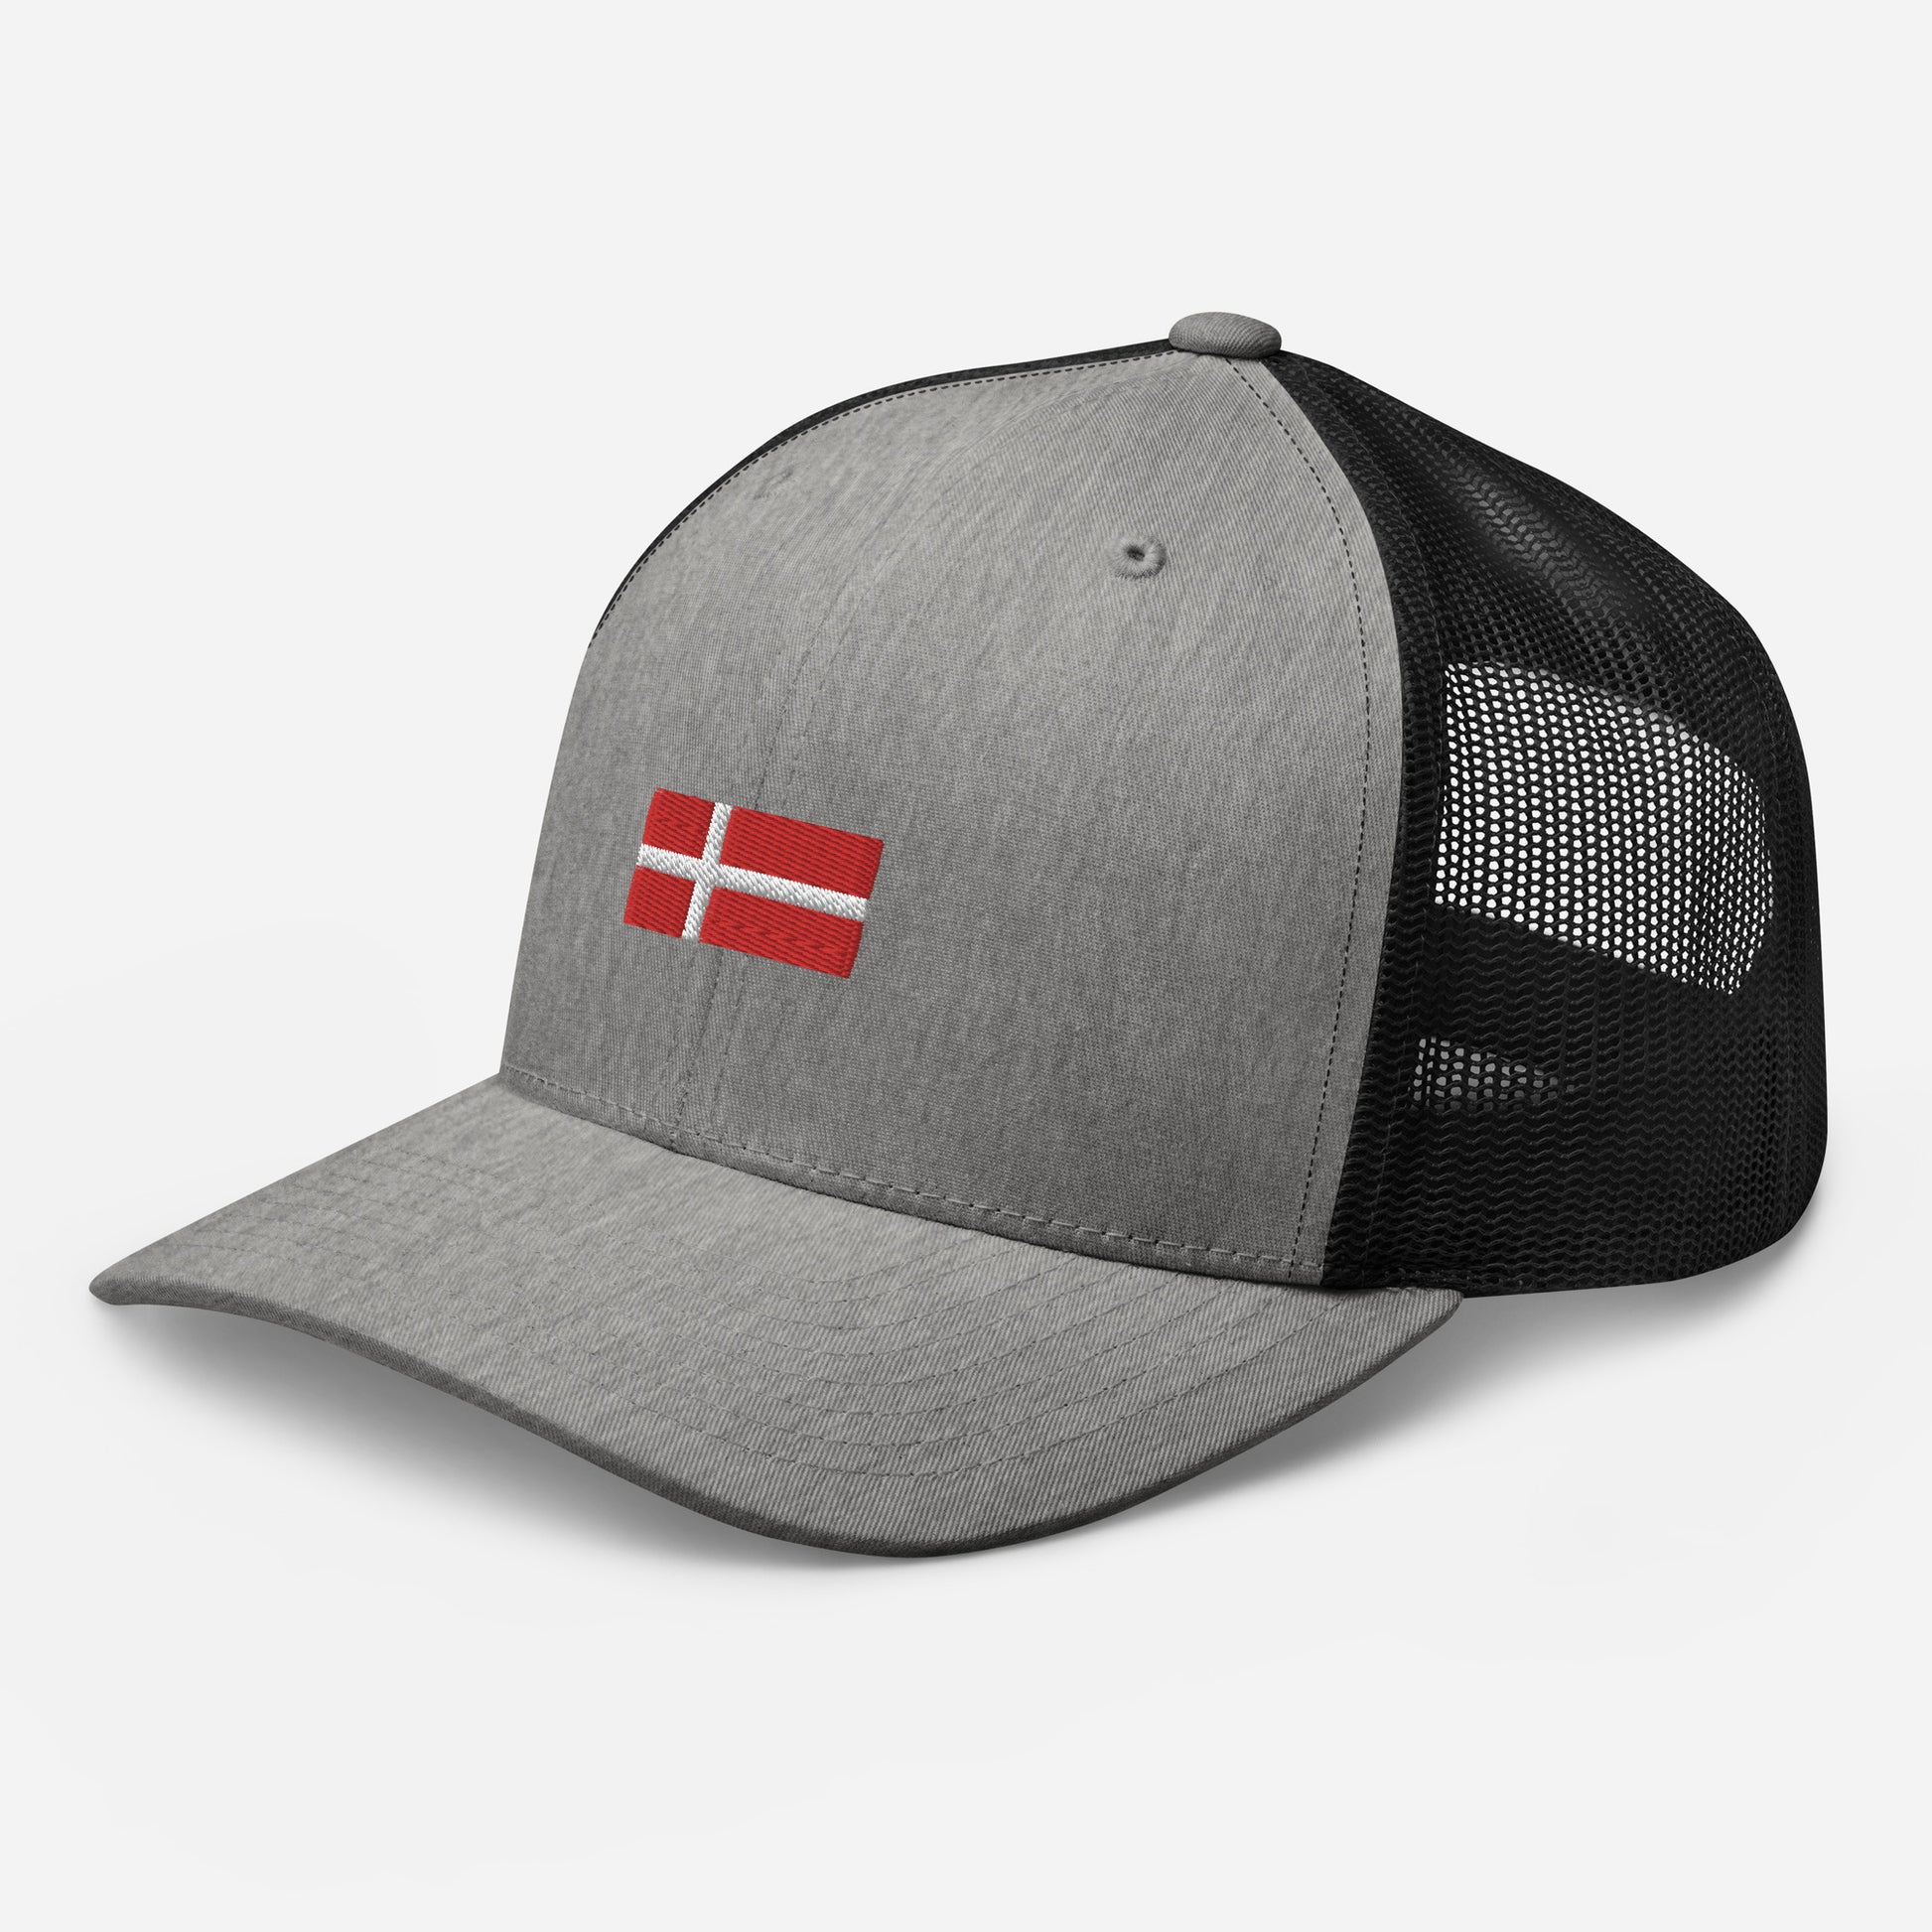 cap-from-the-front-with-danish-flag